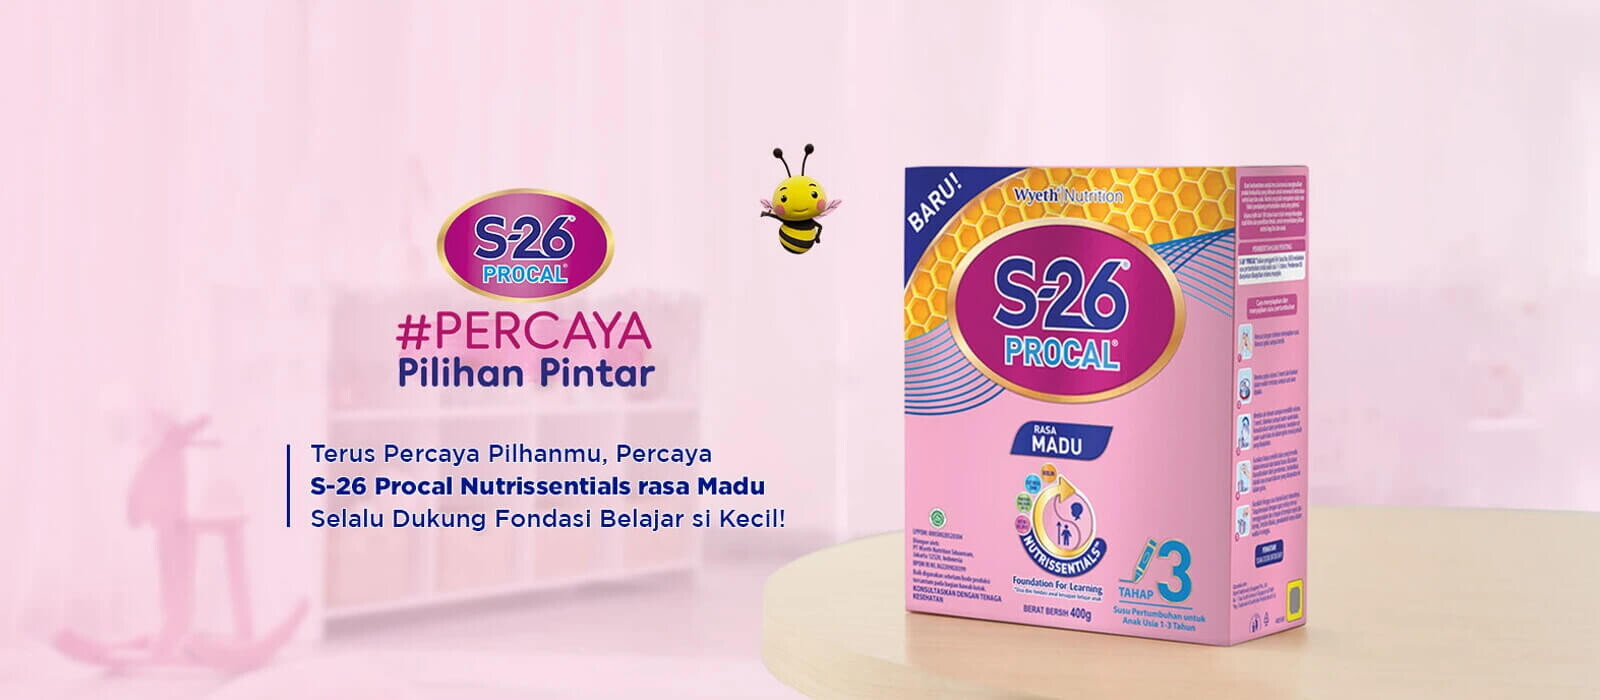 Product-Page-Honey_Banner_1600x700_revised